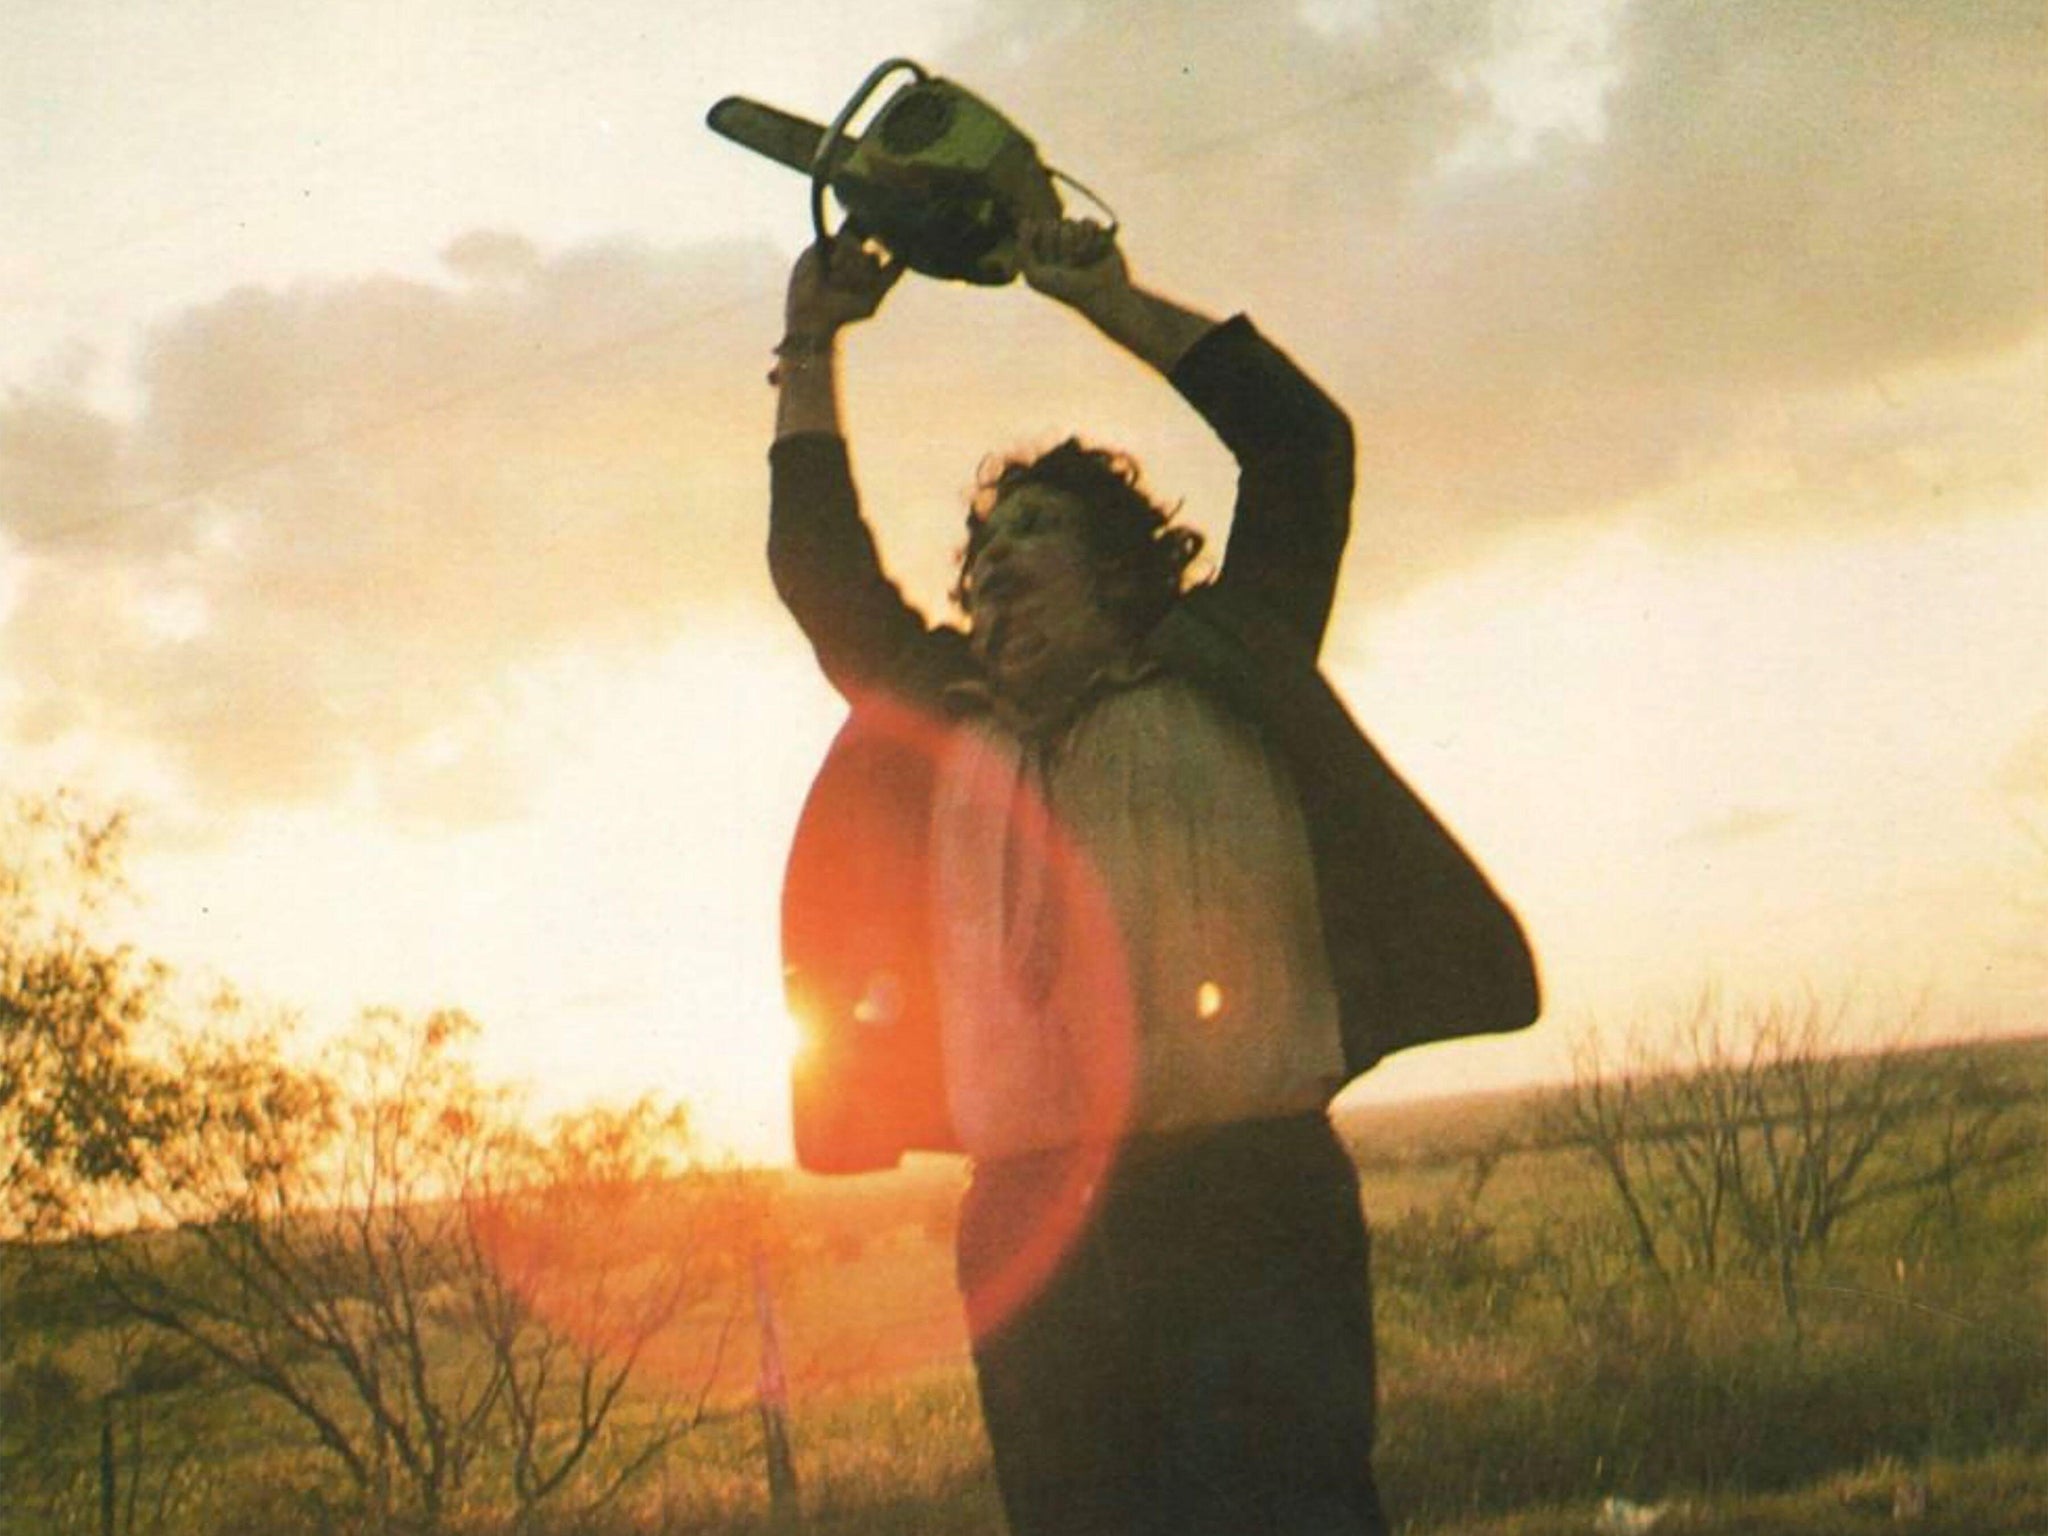 Few movies manage what ‘Chain Saw’ did: to instil both empathy for and fear of their scariest figure